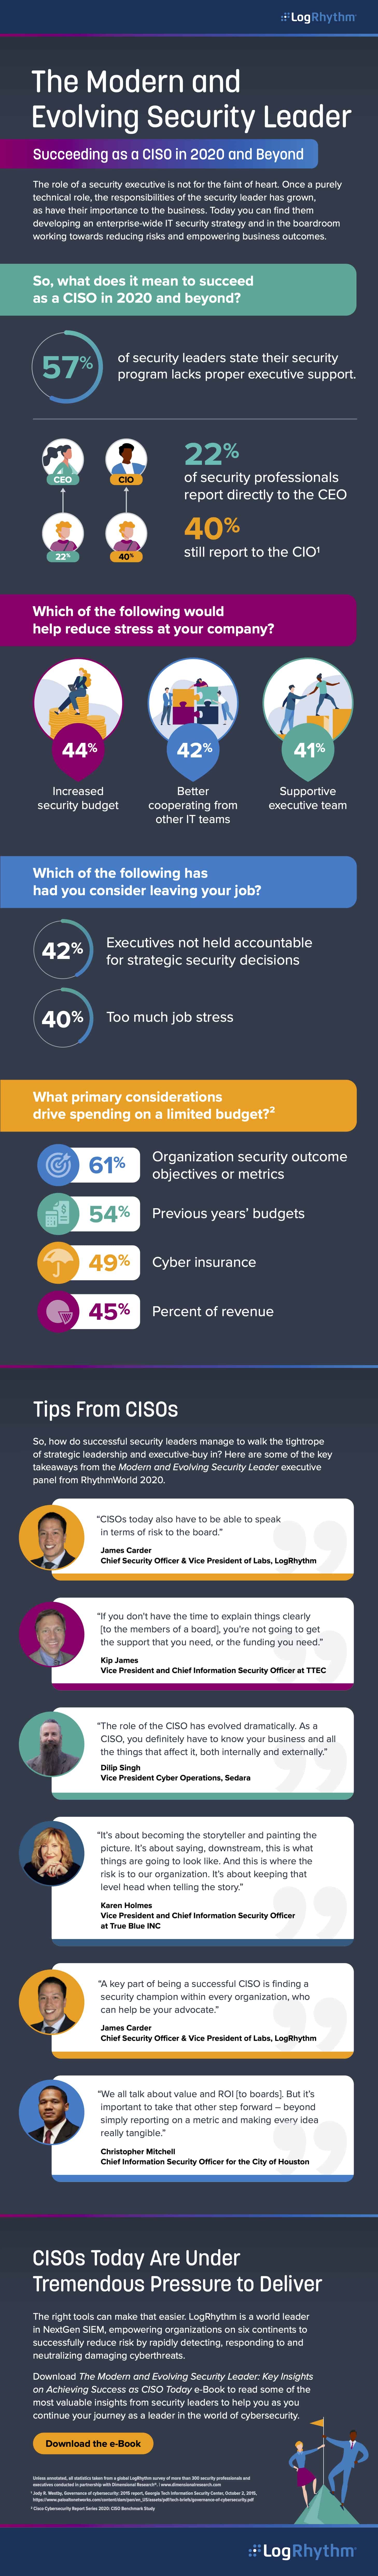 Cybersecurity infographic: The Modern and Evolving Security Leader